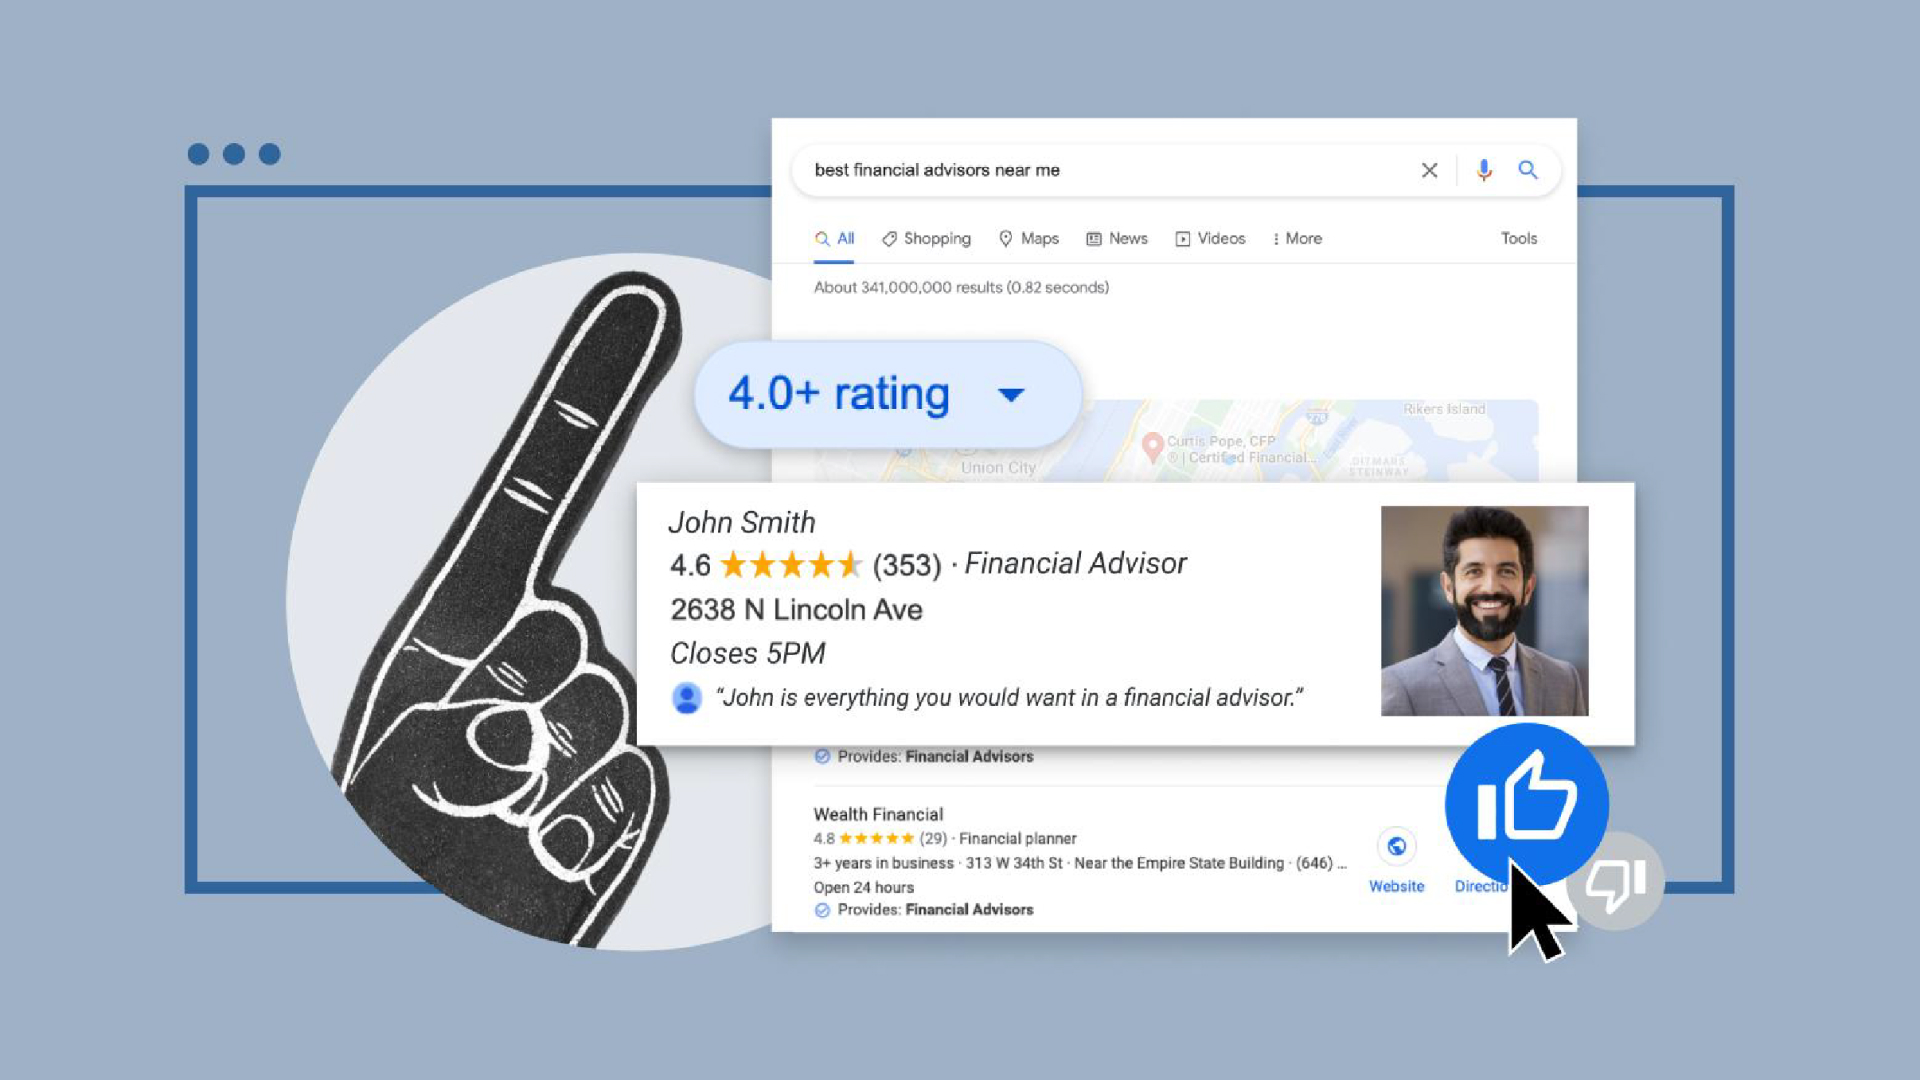 Search results  for "best financial advisors near me"